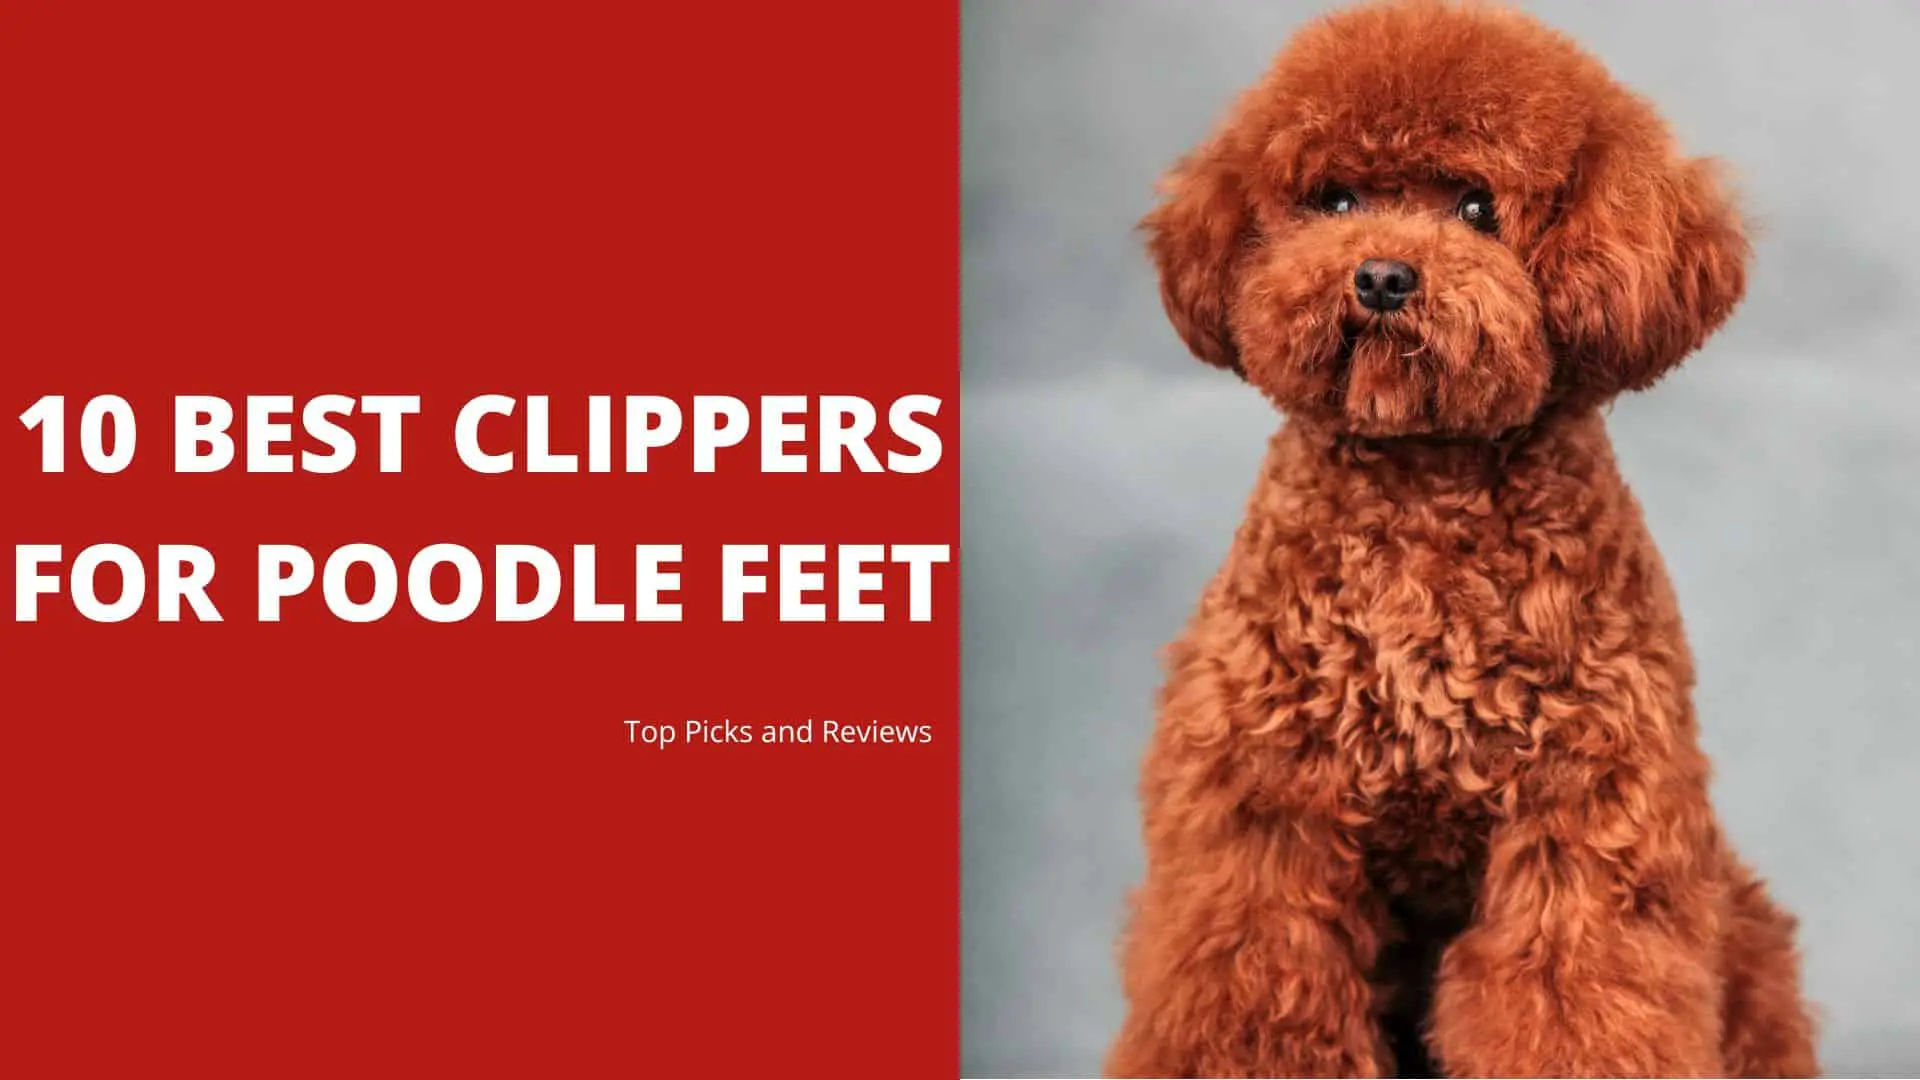 10 Best Clippers For Poodle Feet 2022 Top Picks and Reviews